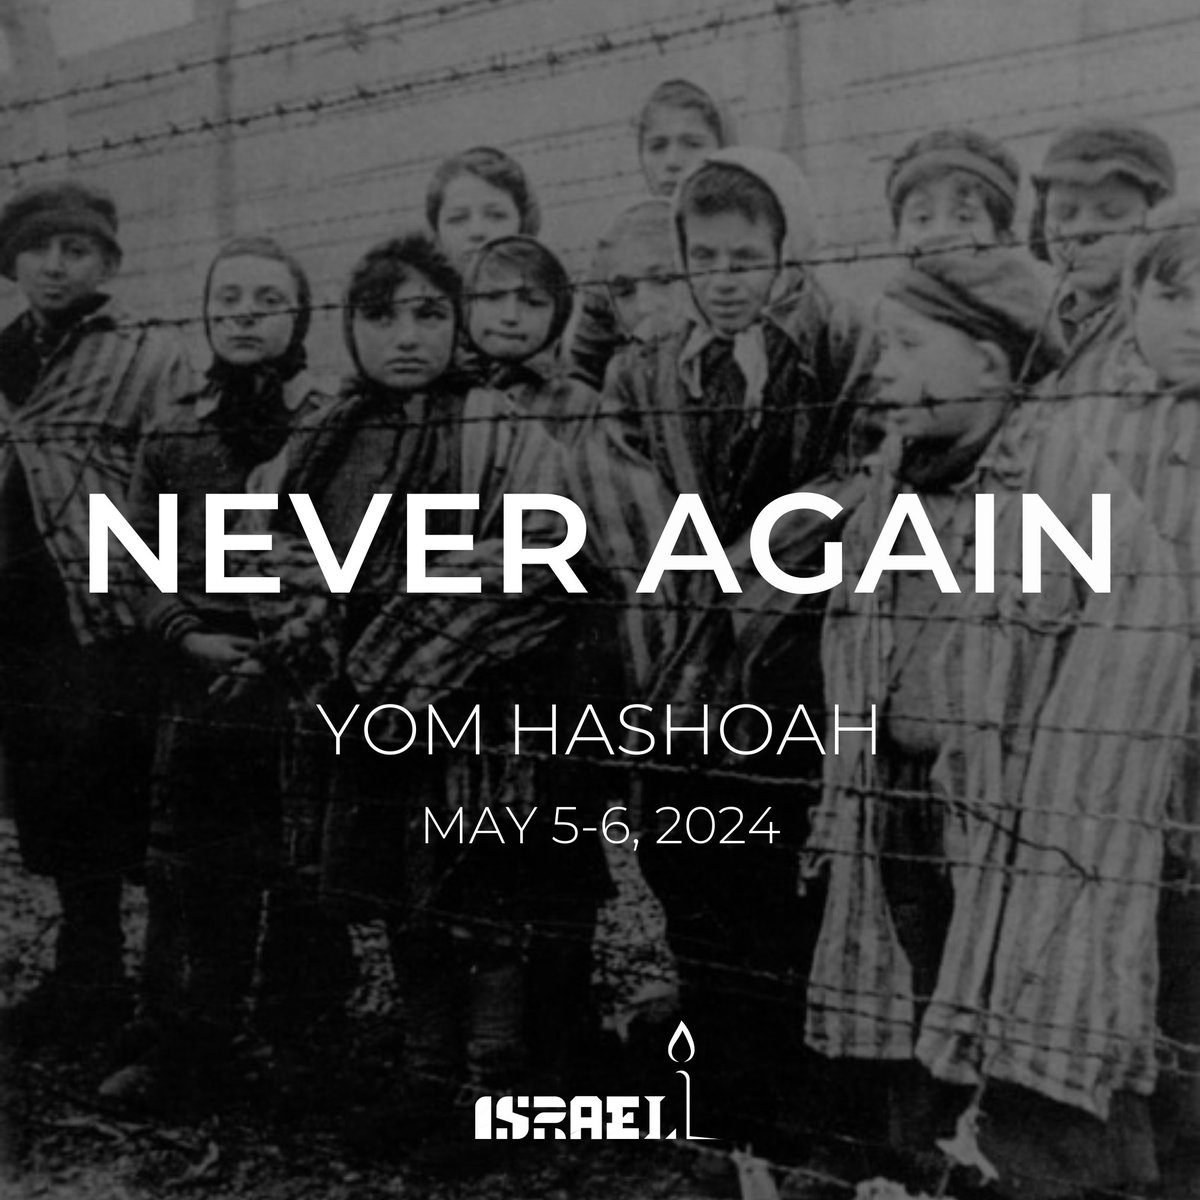 Today marks Holocaust Memorial Day. Let us remember the 6 million. Never again.